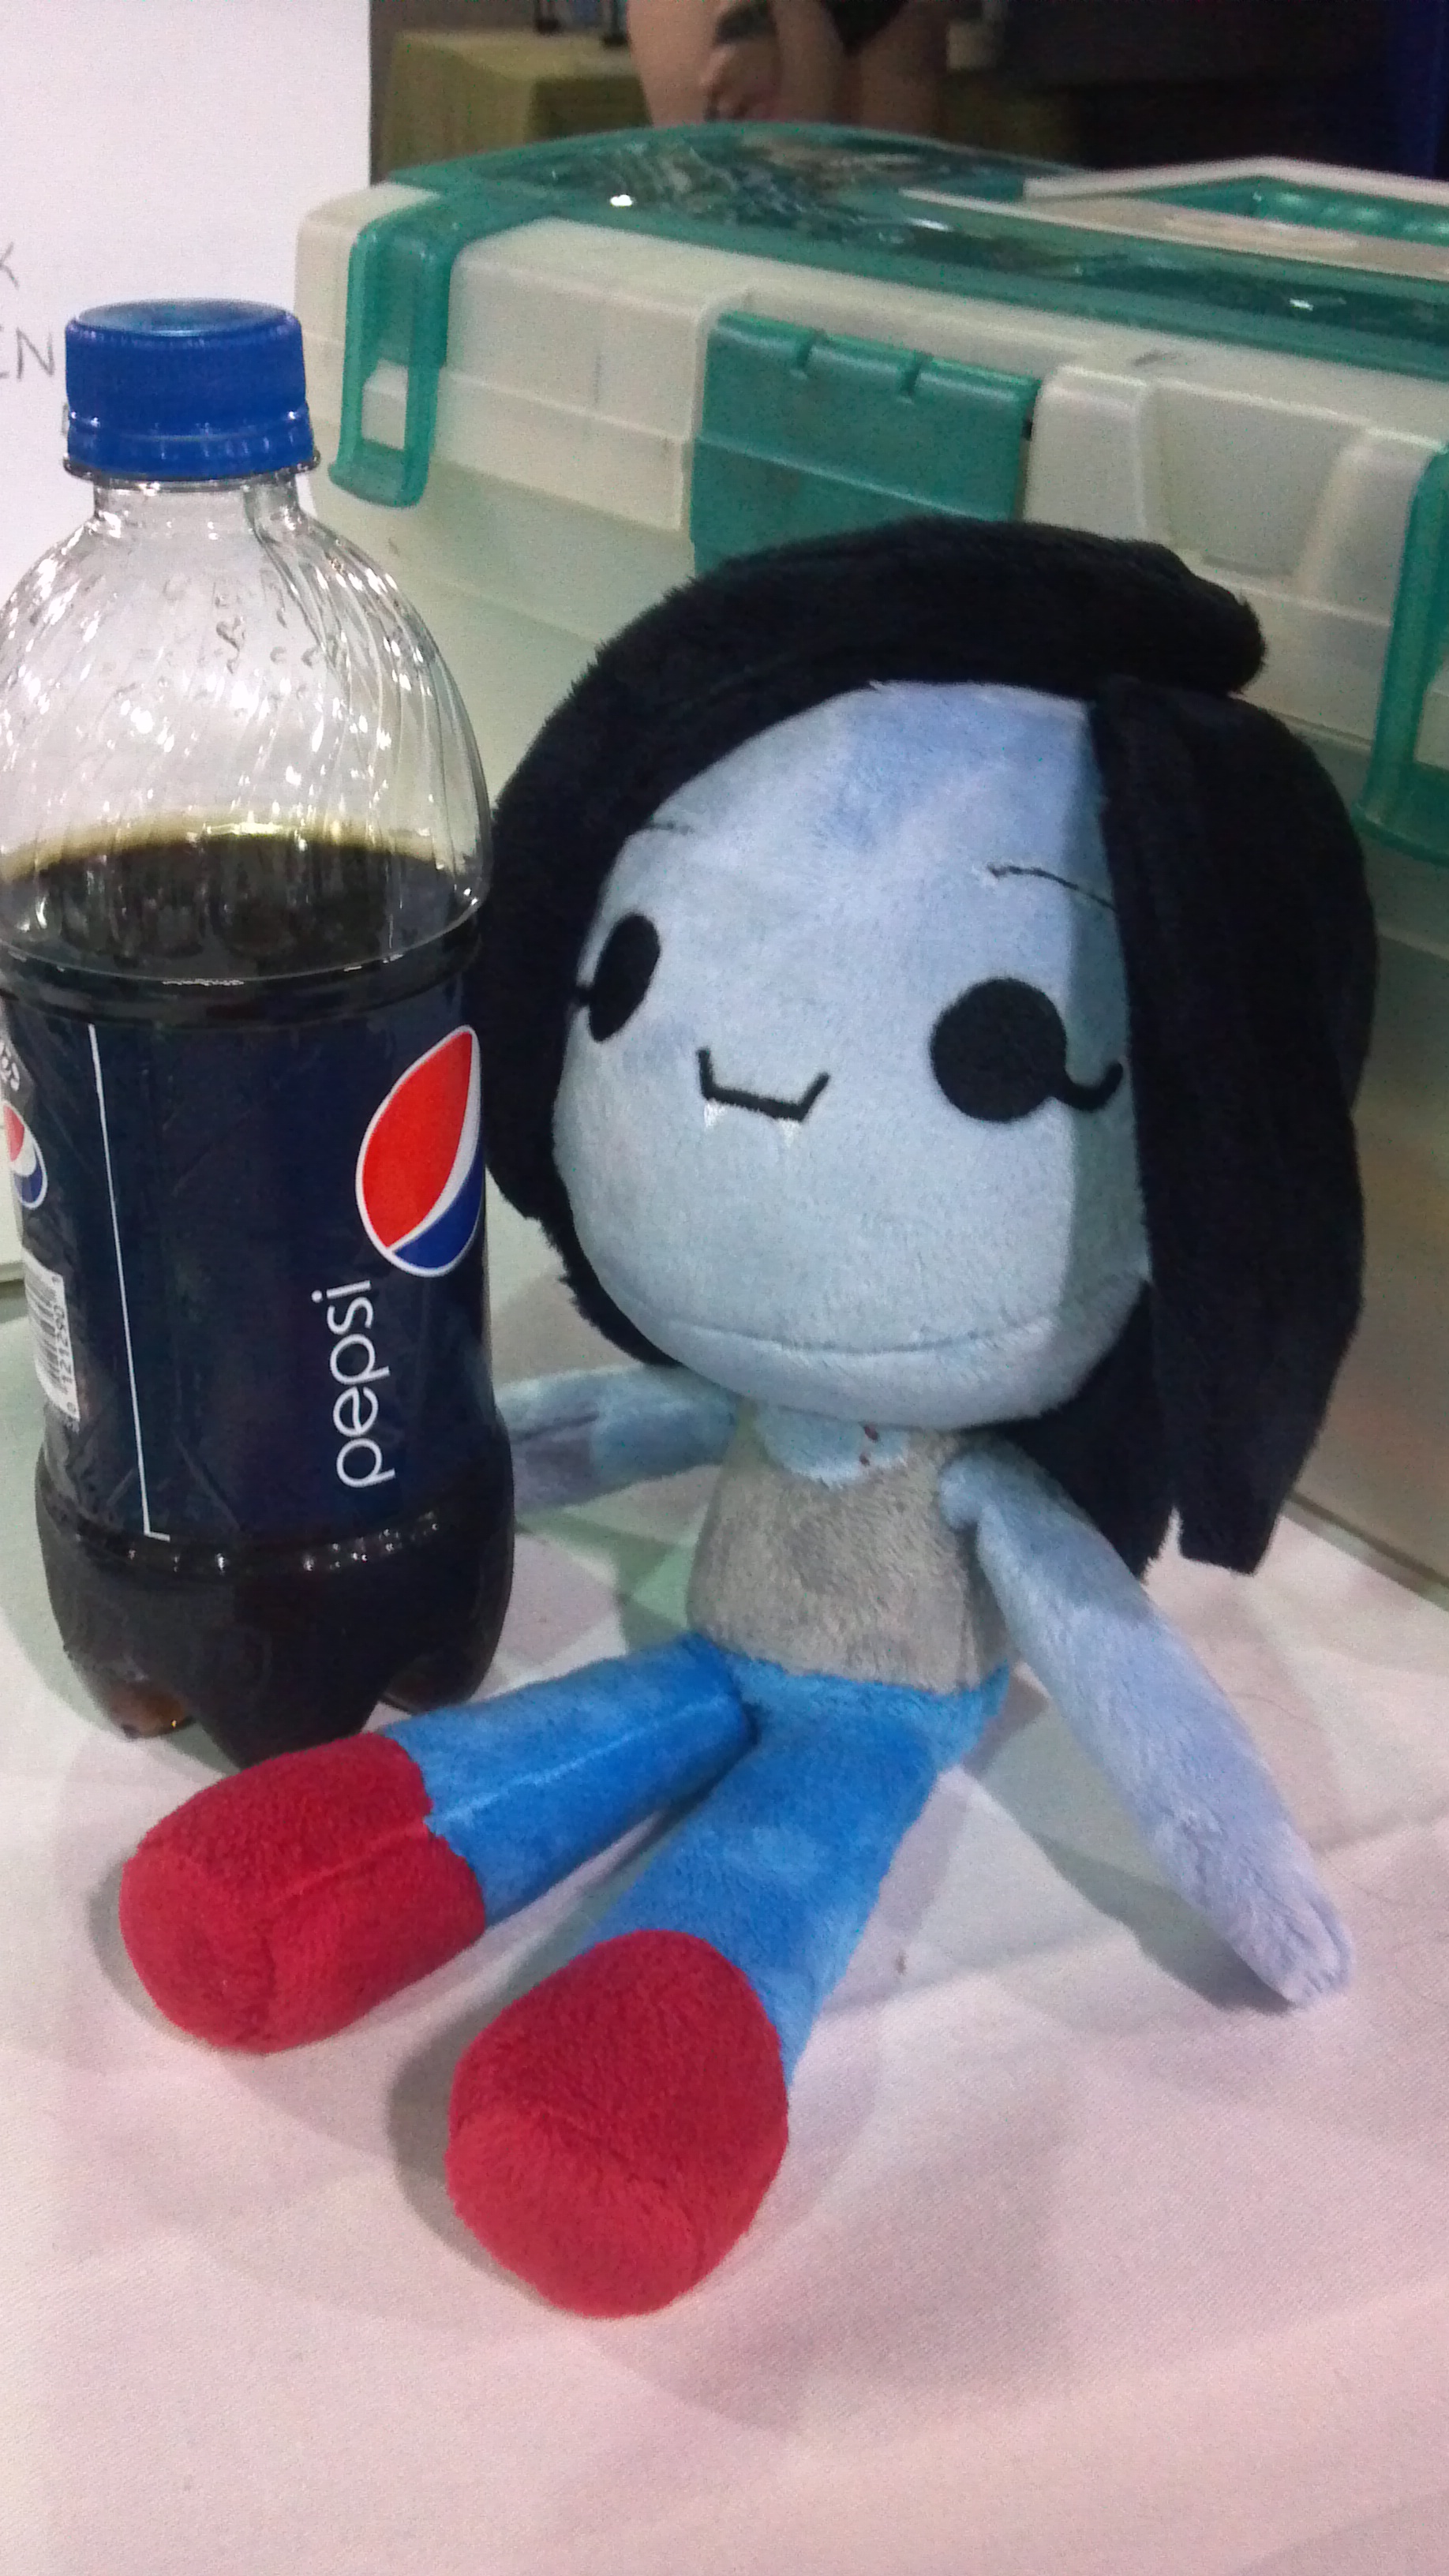 Doll with Pepsi